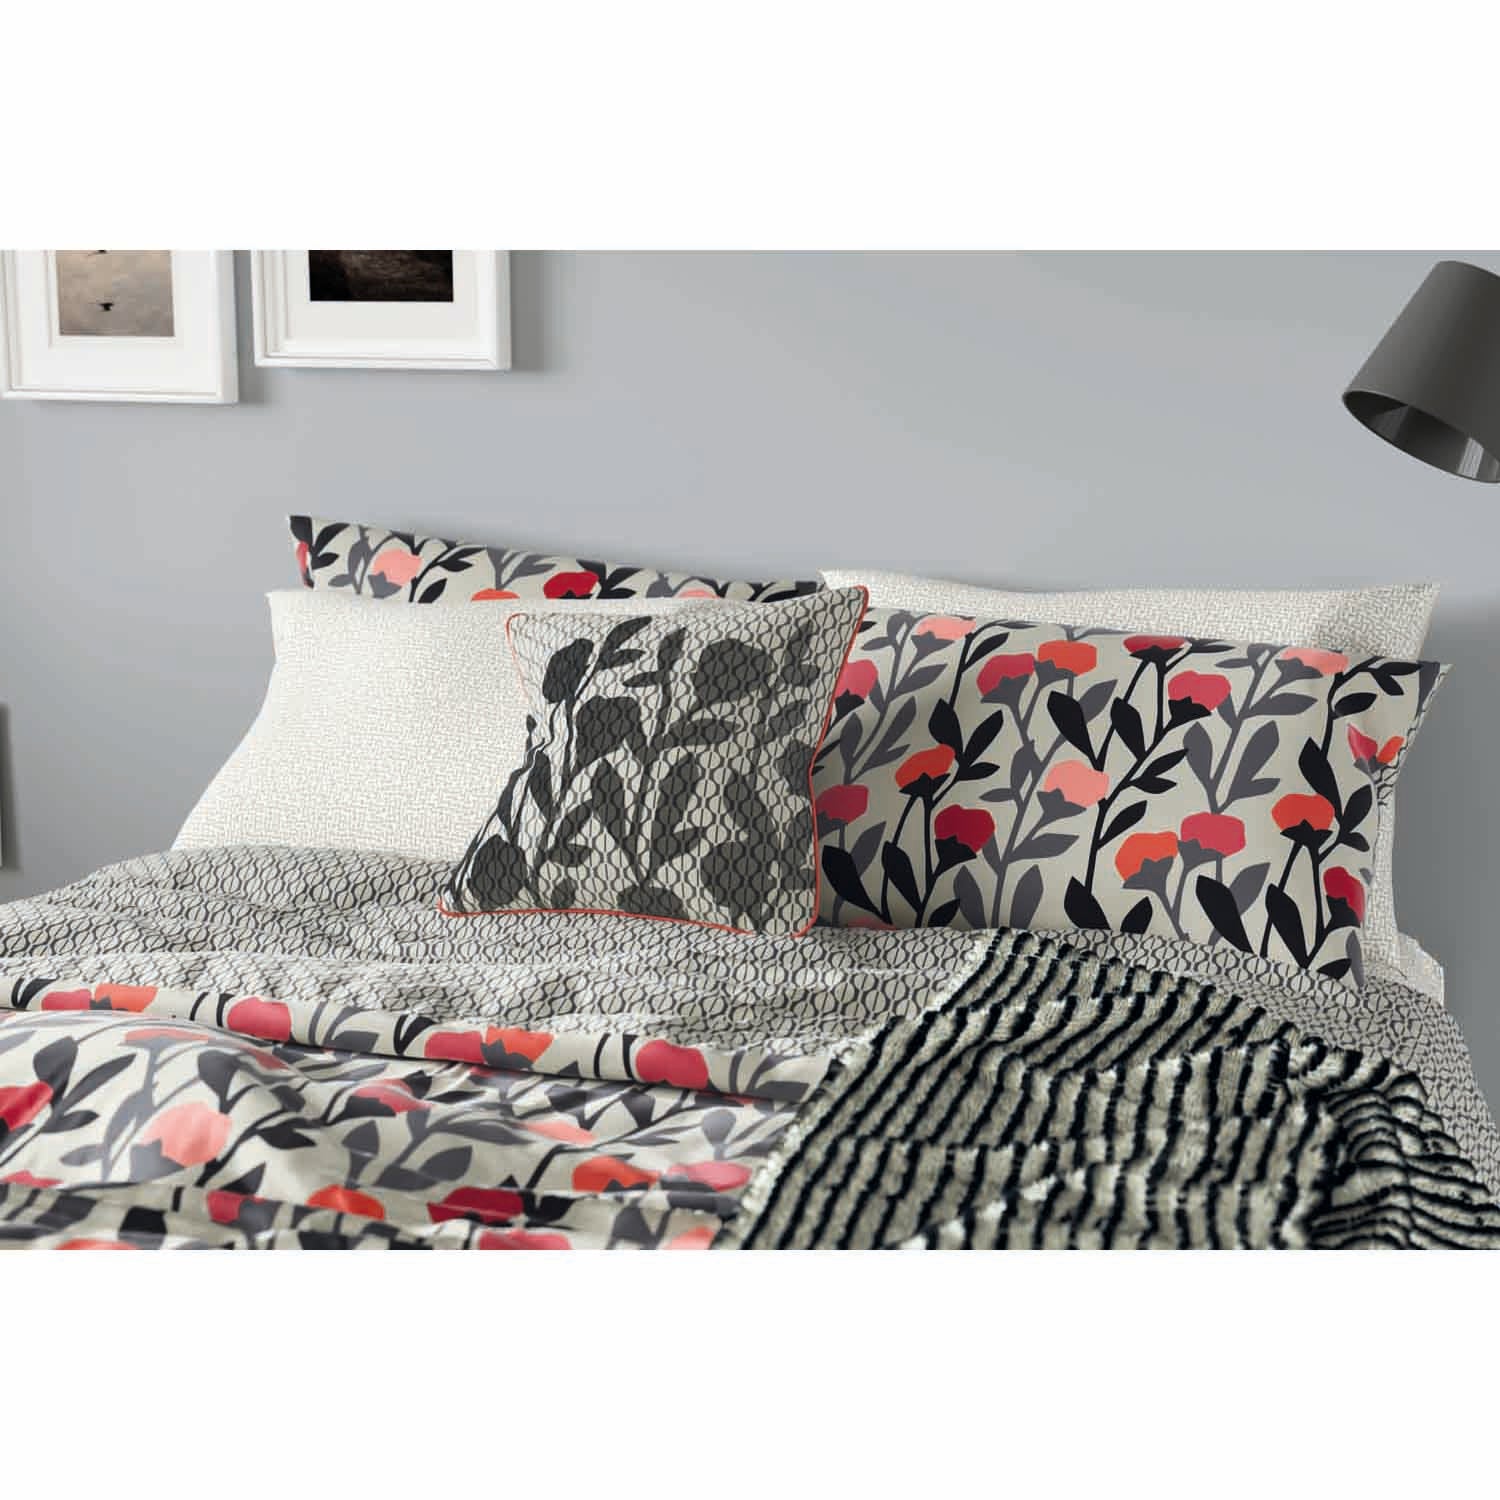  Helena Springfield Ava Duvet Cover Set - Stone &amp; Charcoal 2 Shaws Department Stores